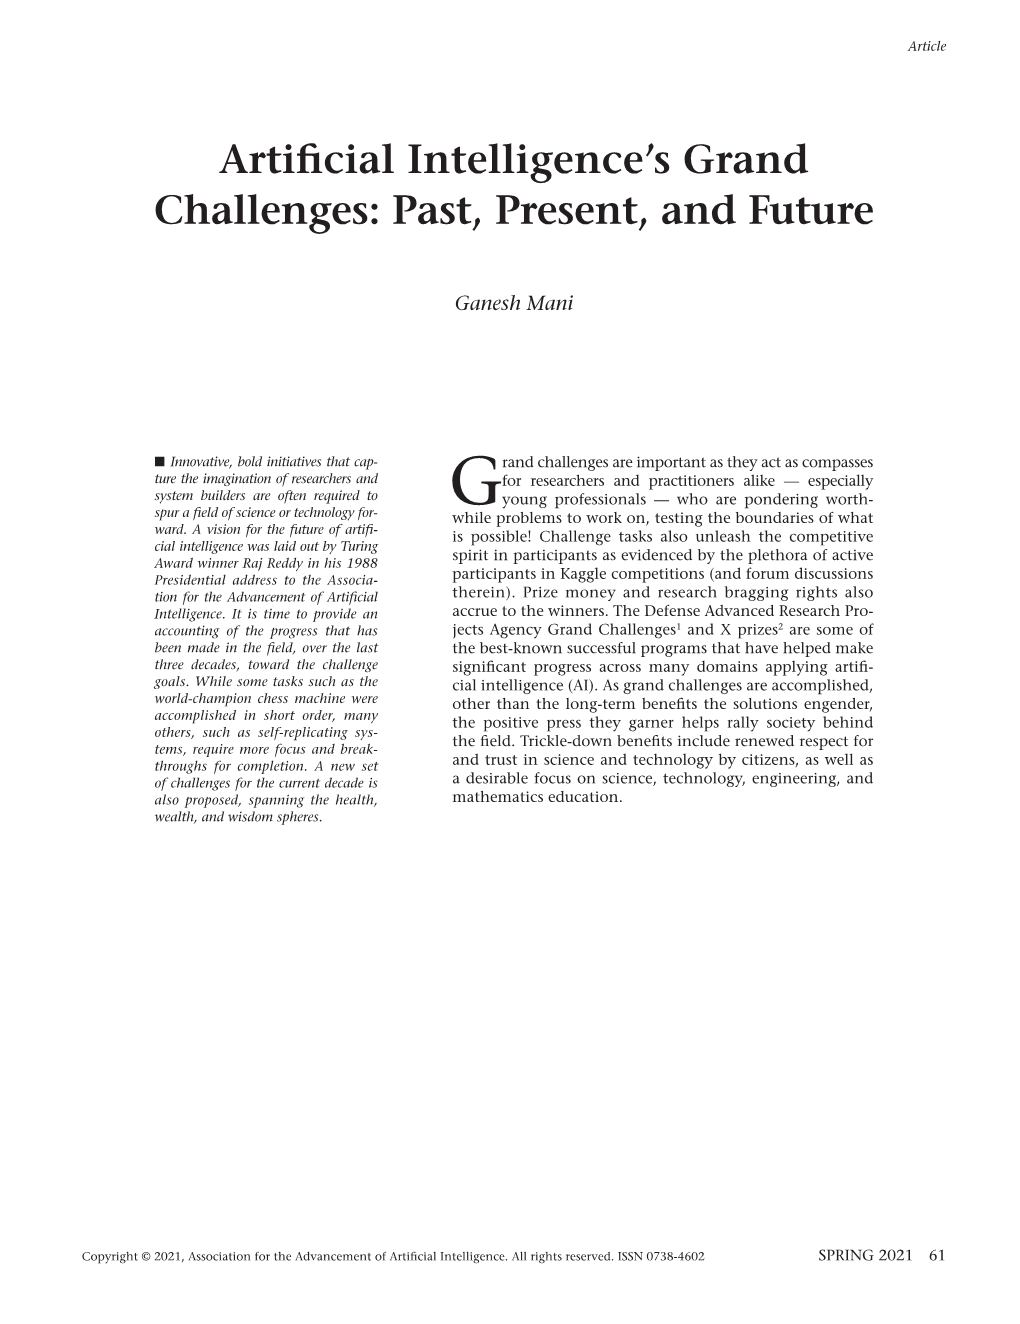 Artificial Intelligence's Grand Challenges